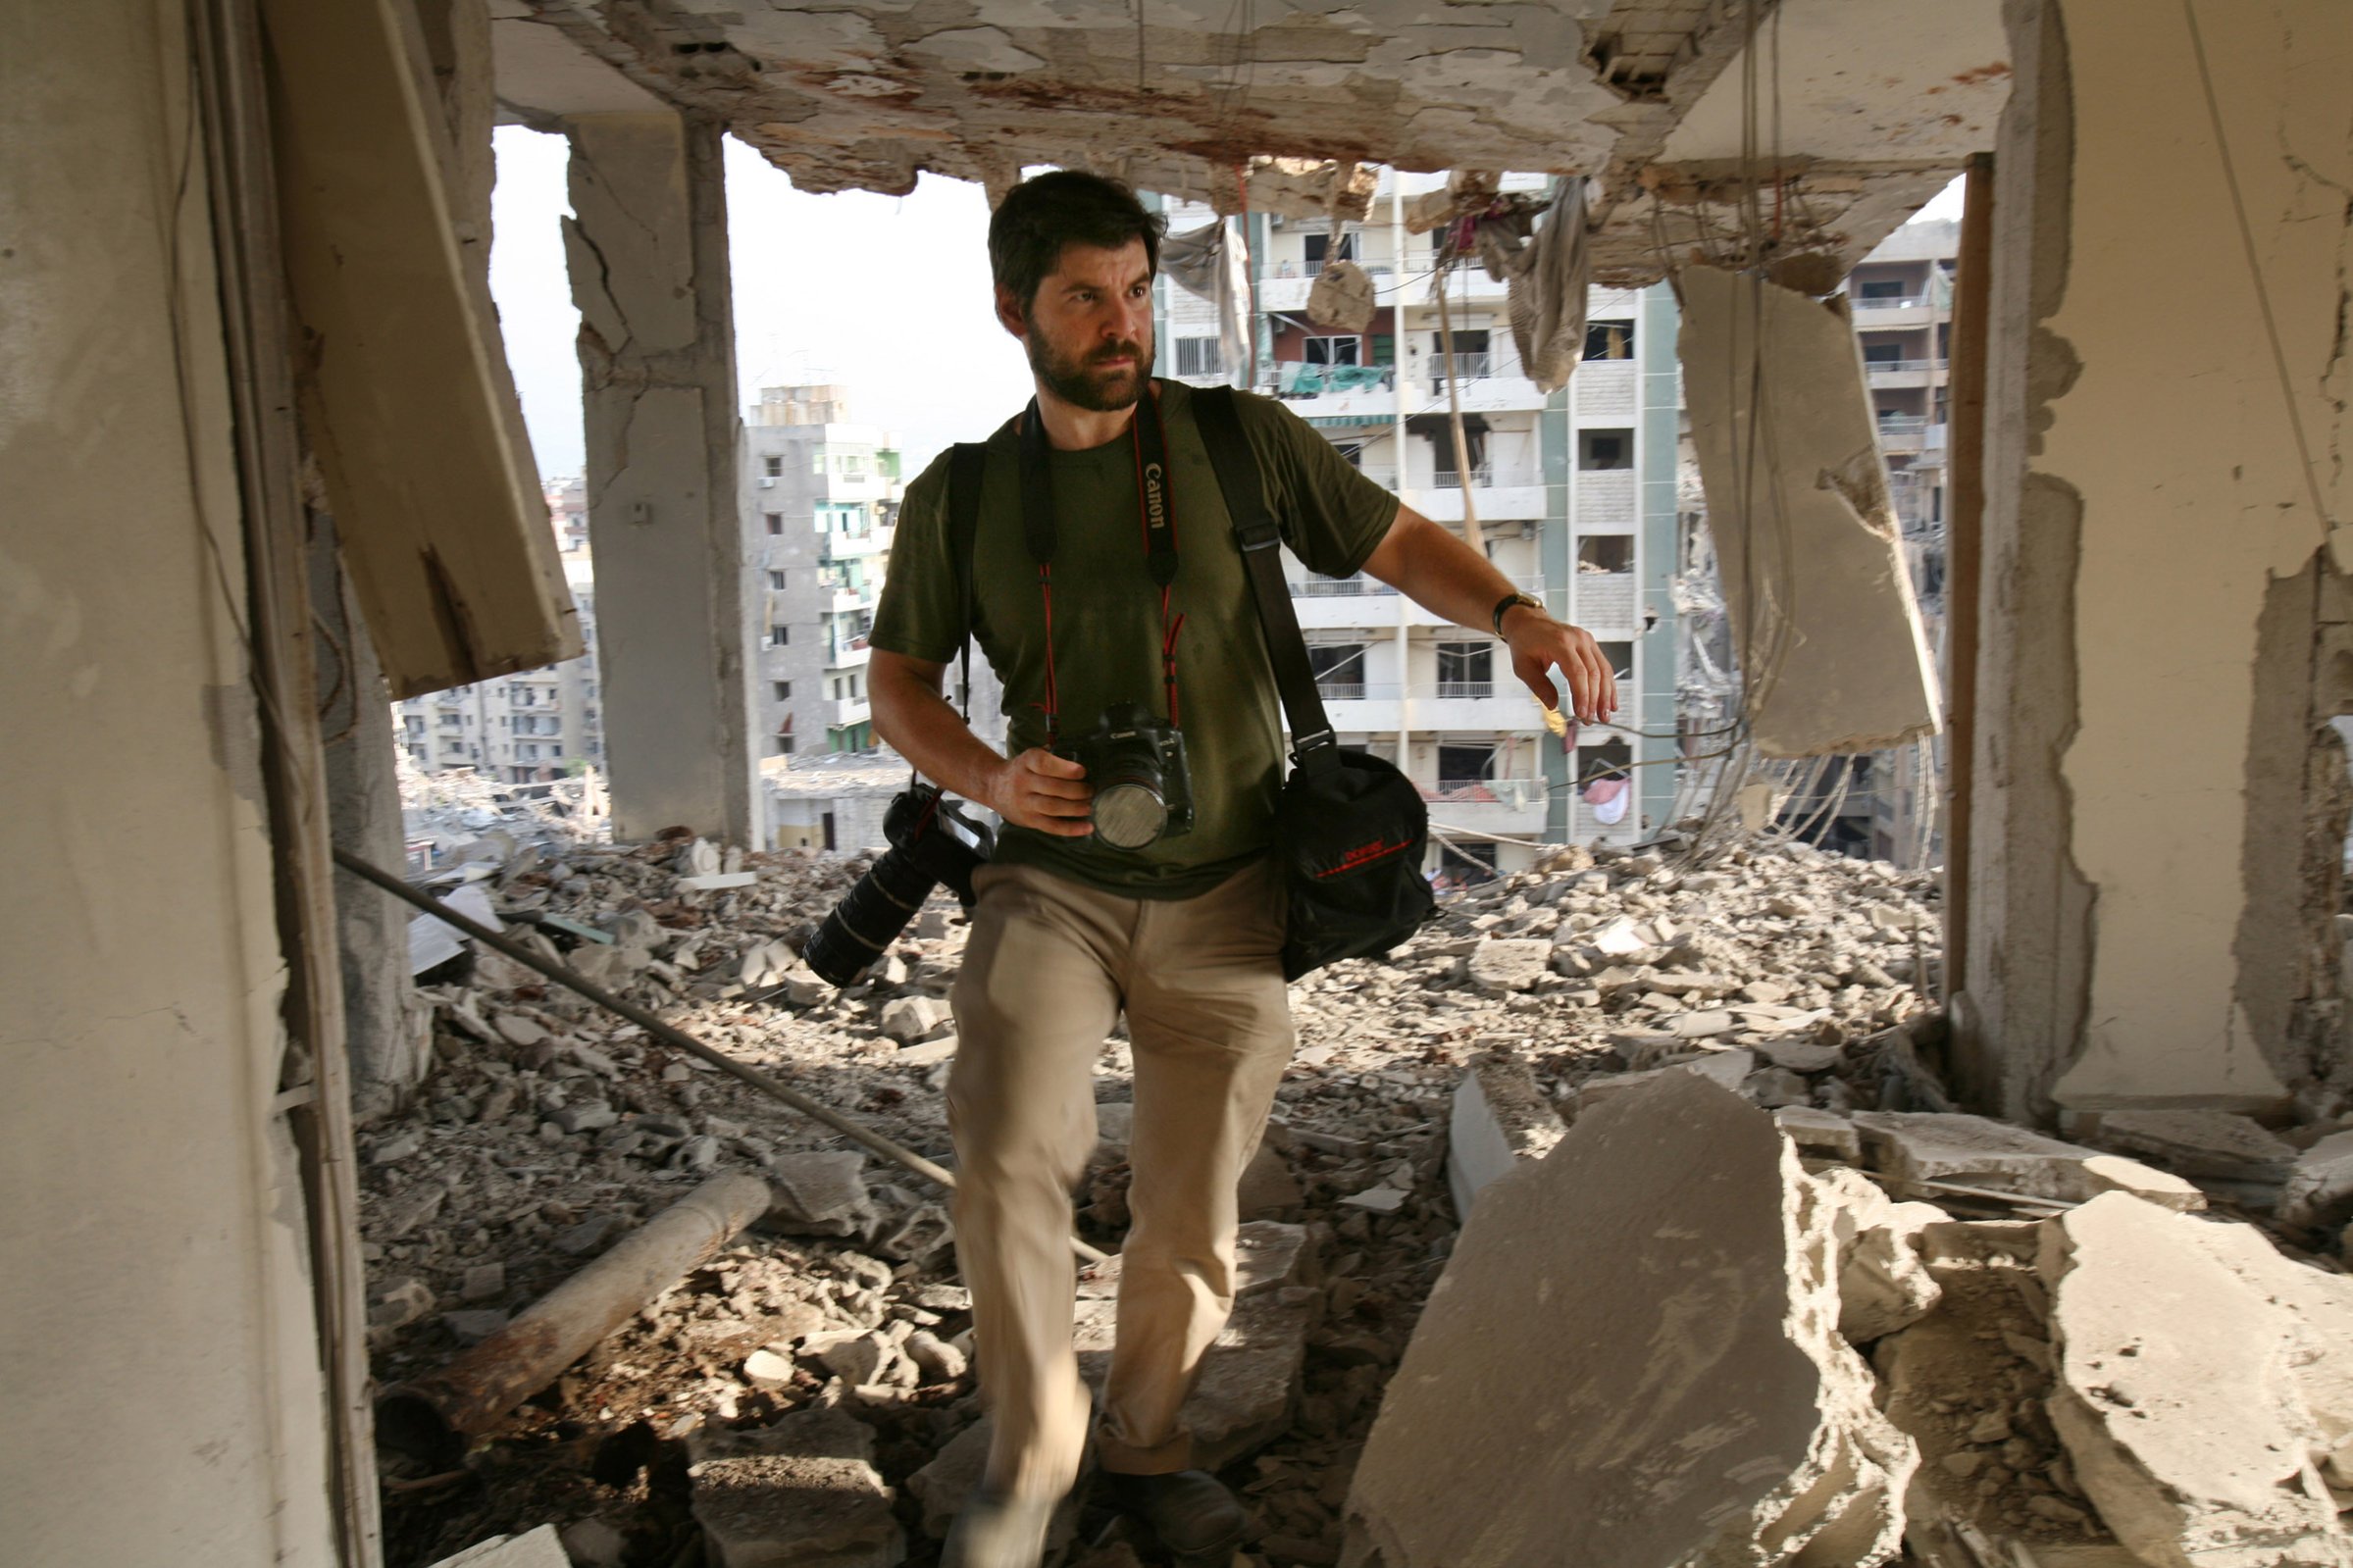 Getty Images photographer Chris Hondros walks through the ruins of a building in southern Beirut on Aug. 21, 2006.